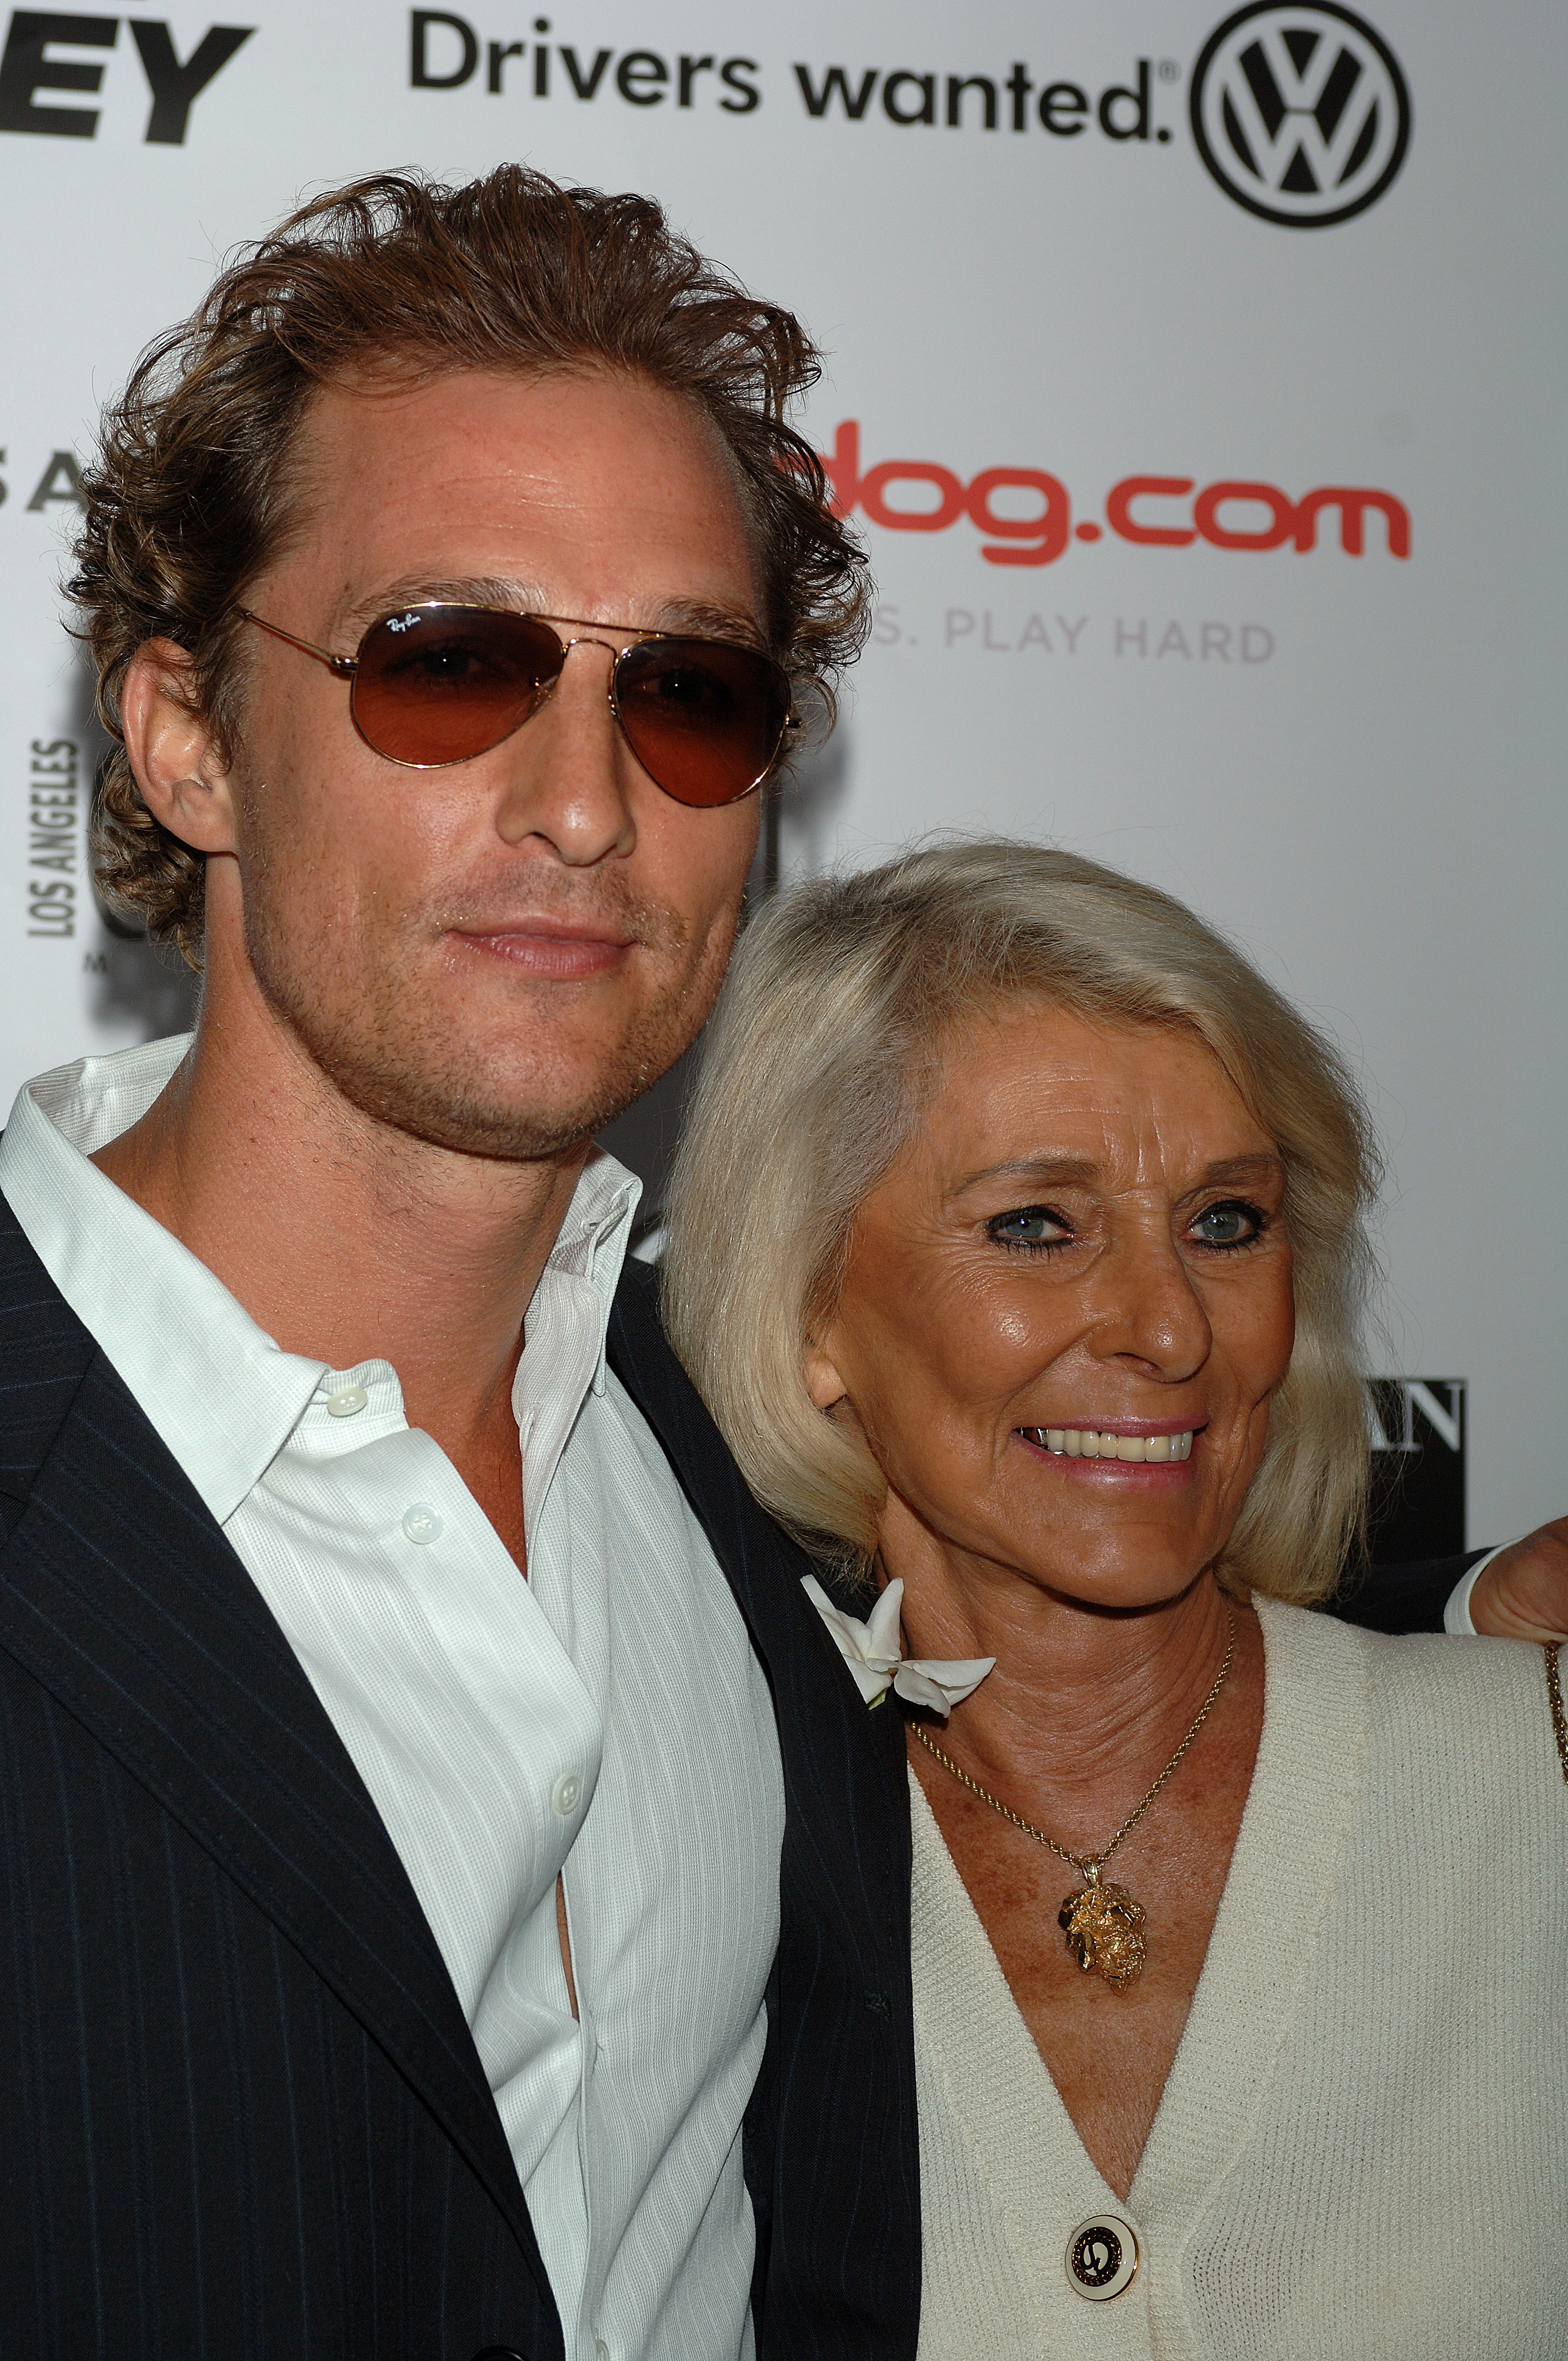 Matthew and Kay McConaughey at the premiere of "Two For The Money" in Beverly Hills, on September 26, 2005 | Source: Getty Images